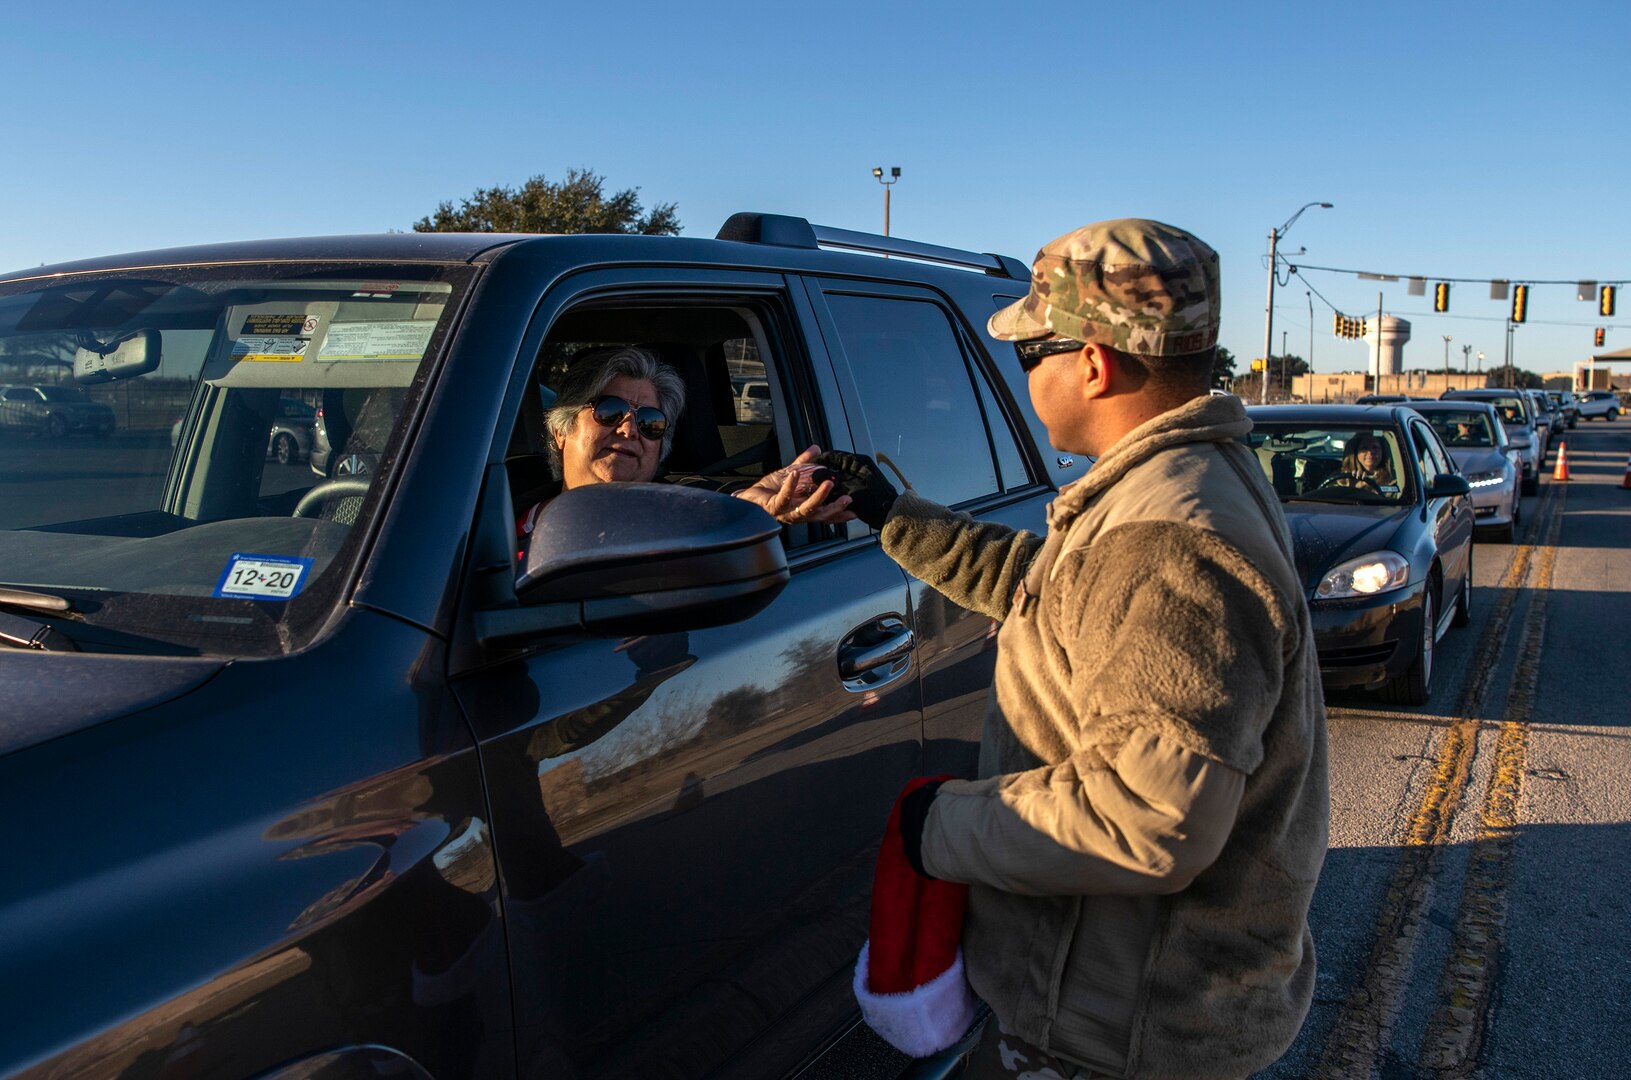 Staff Sgt. Henin Rios Arauz, Inter-American Air Forces Academy, hands out a candy cane during the morning inbound commute in support of the 37th Training Wing new initiative, “We Care,” at Joint Base San Antonio-Lackland, Texas, Dec. 18, 2019. The initiative involved 37th Training Wing military and civilian members spending the morning at various gates letting each person know that they stand together in support of those struggling with depression and thoughts of suicide by holding a positive message of support and handing out over 400 candy canes. If you are struggling with thoughts of suicide, please go directly to the Mental Health Clinic or to your closest Emergency Room. You can also reach the National Suicide Prevention Lifeline at 1-800-273-8255.